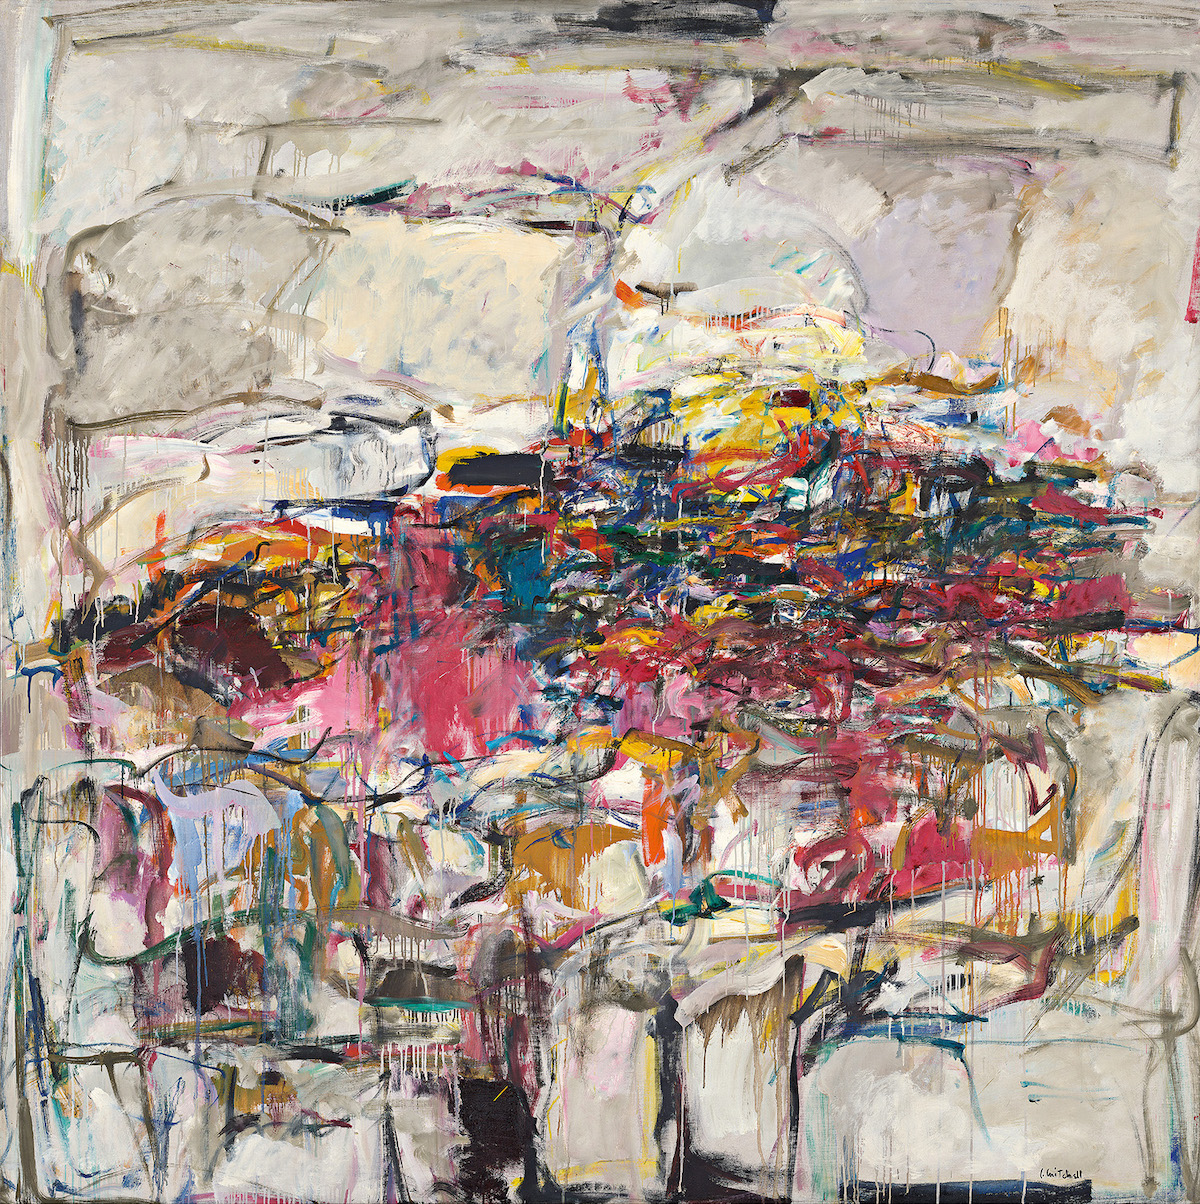 Joan Mitchell, City Landscape, 1955. ©ESTATE OF JOAN MITCHELL/PHOTO AIMEE MARSHALL/ART INSTITUTE OF CHICAGO